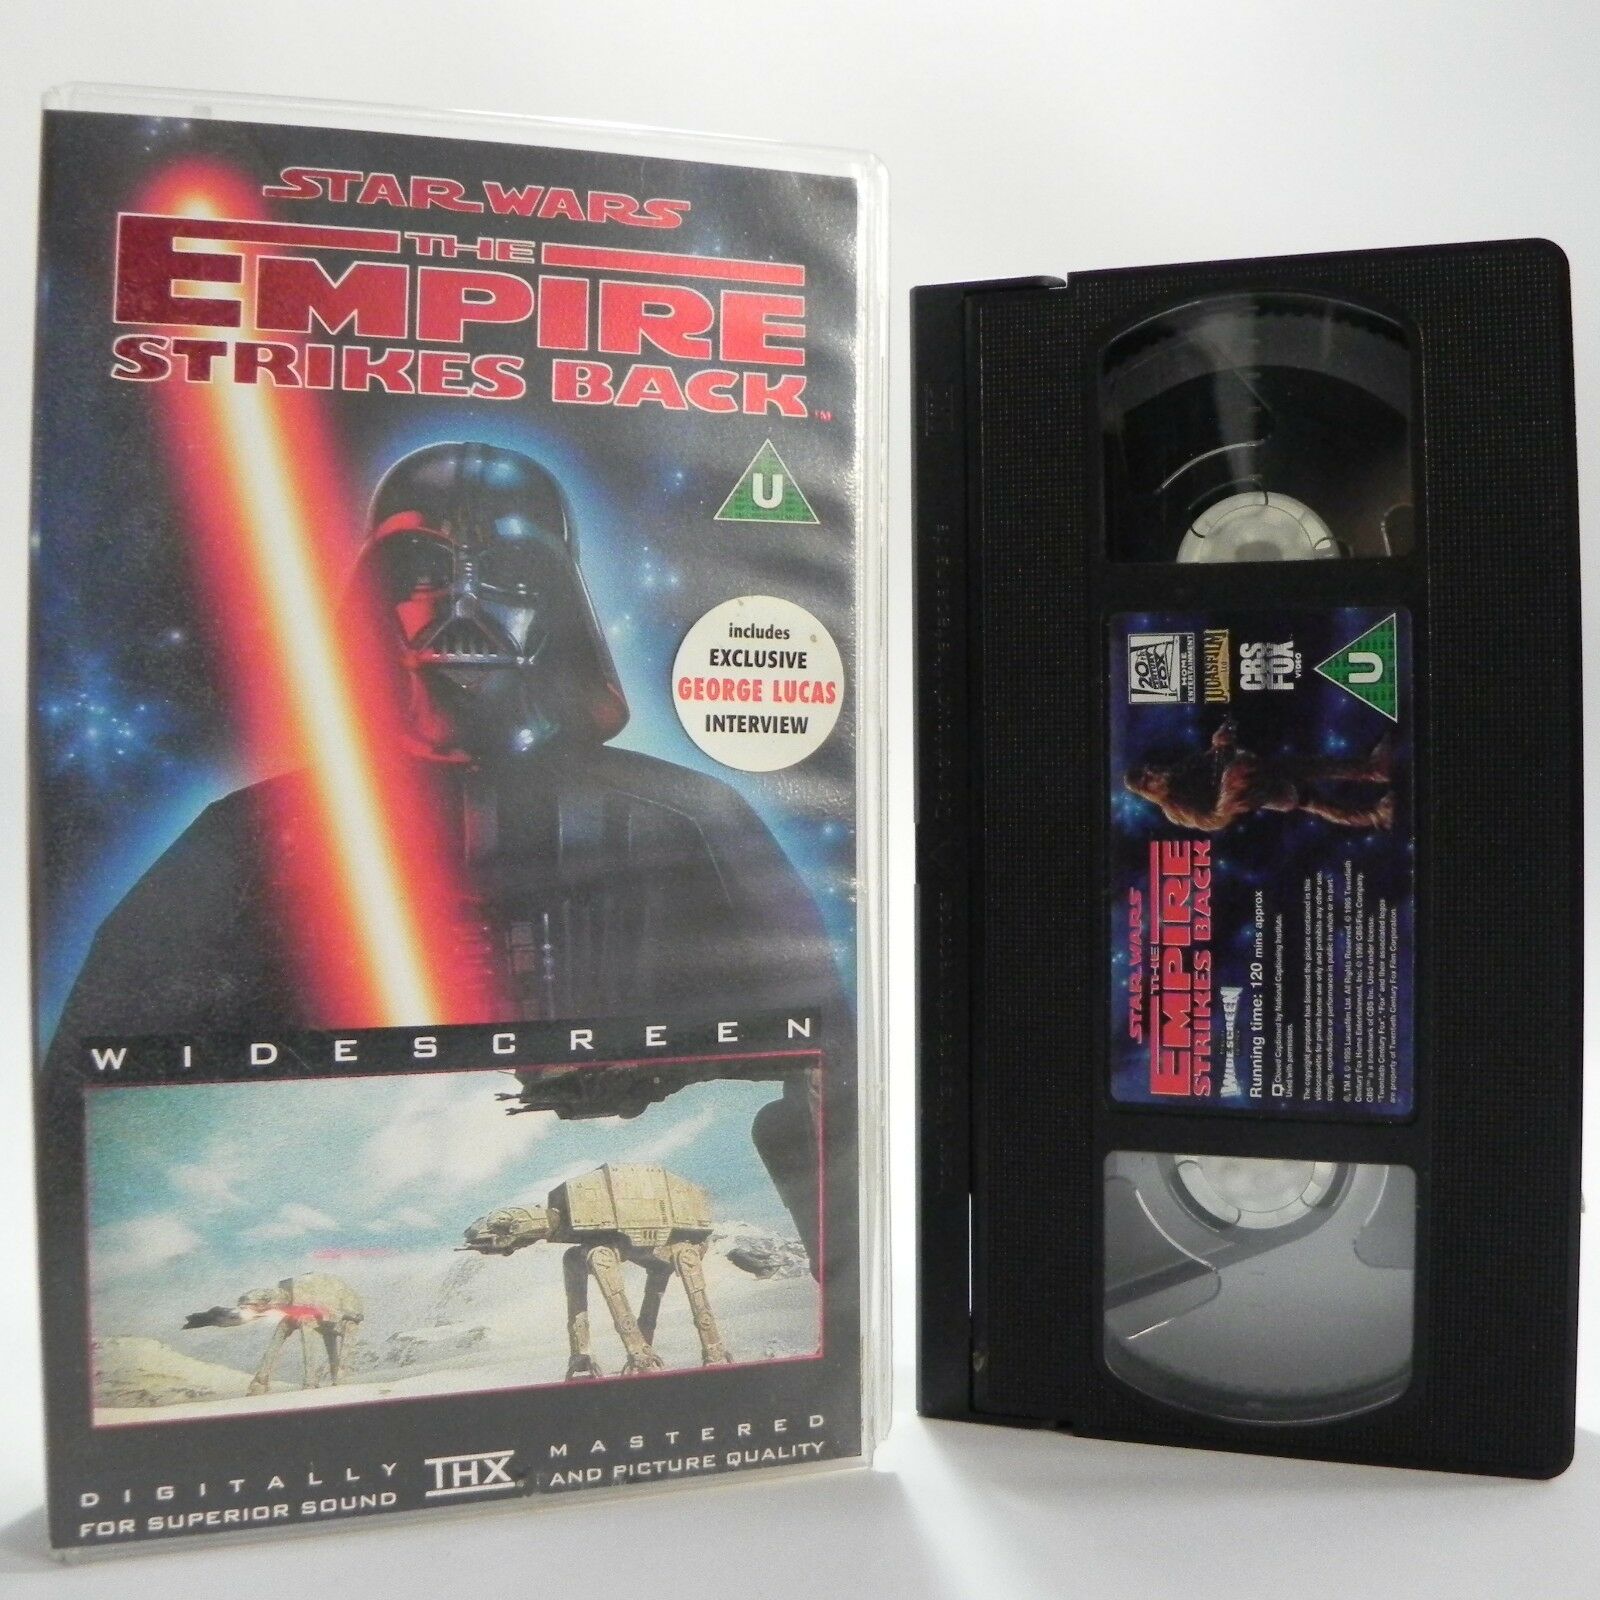 The Empire Strikes Back: Star Wars 5 - (1980) Sci-Fi - Widescreen - Pal VHS-